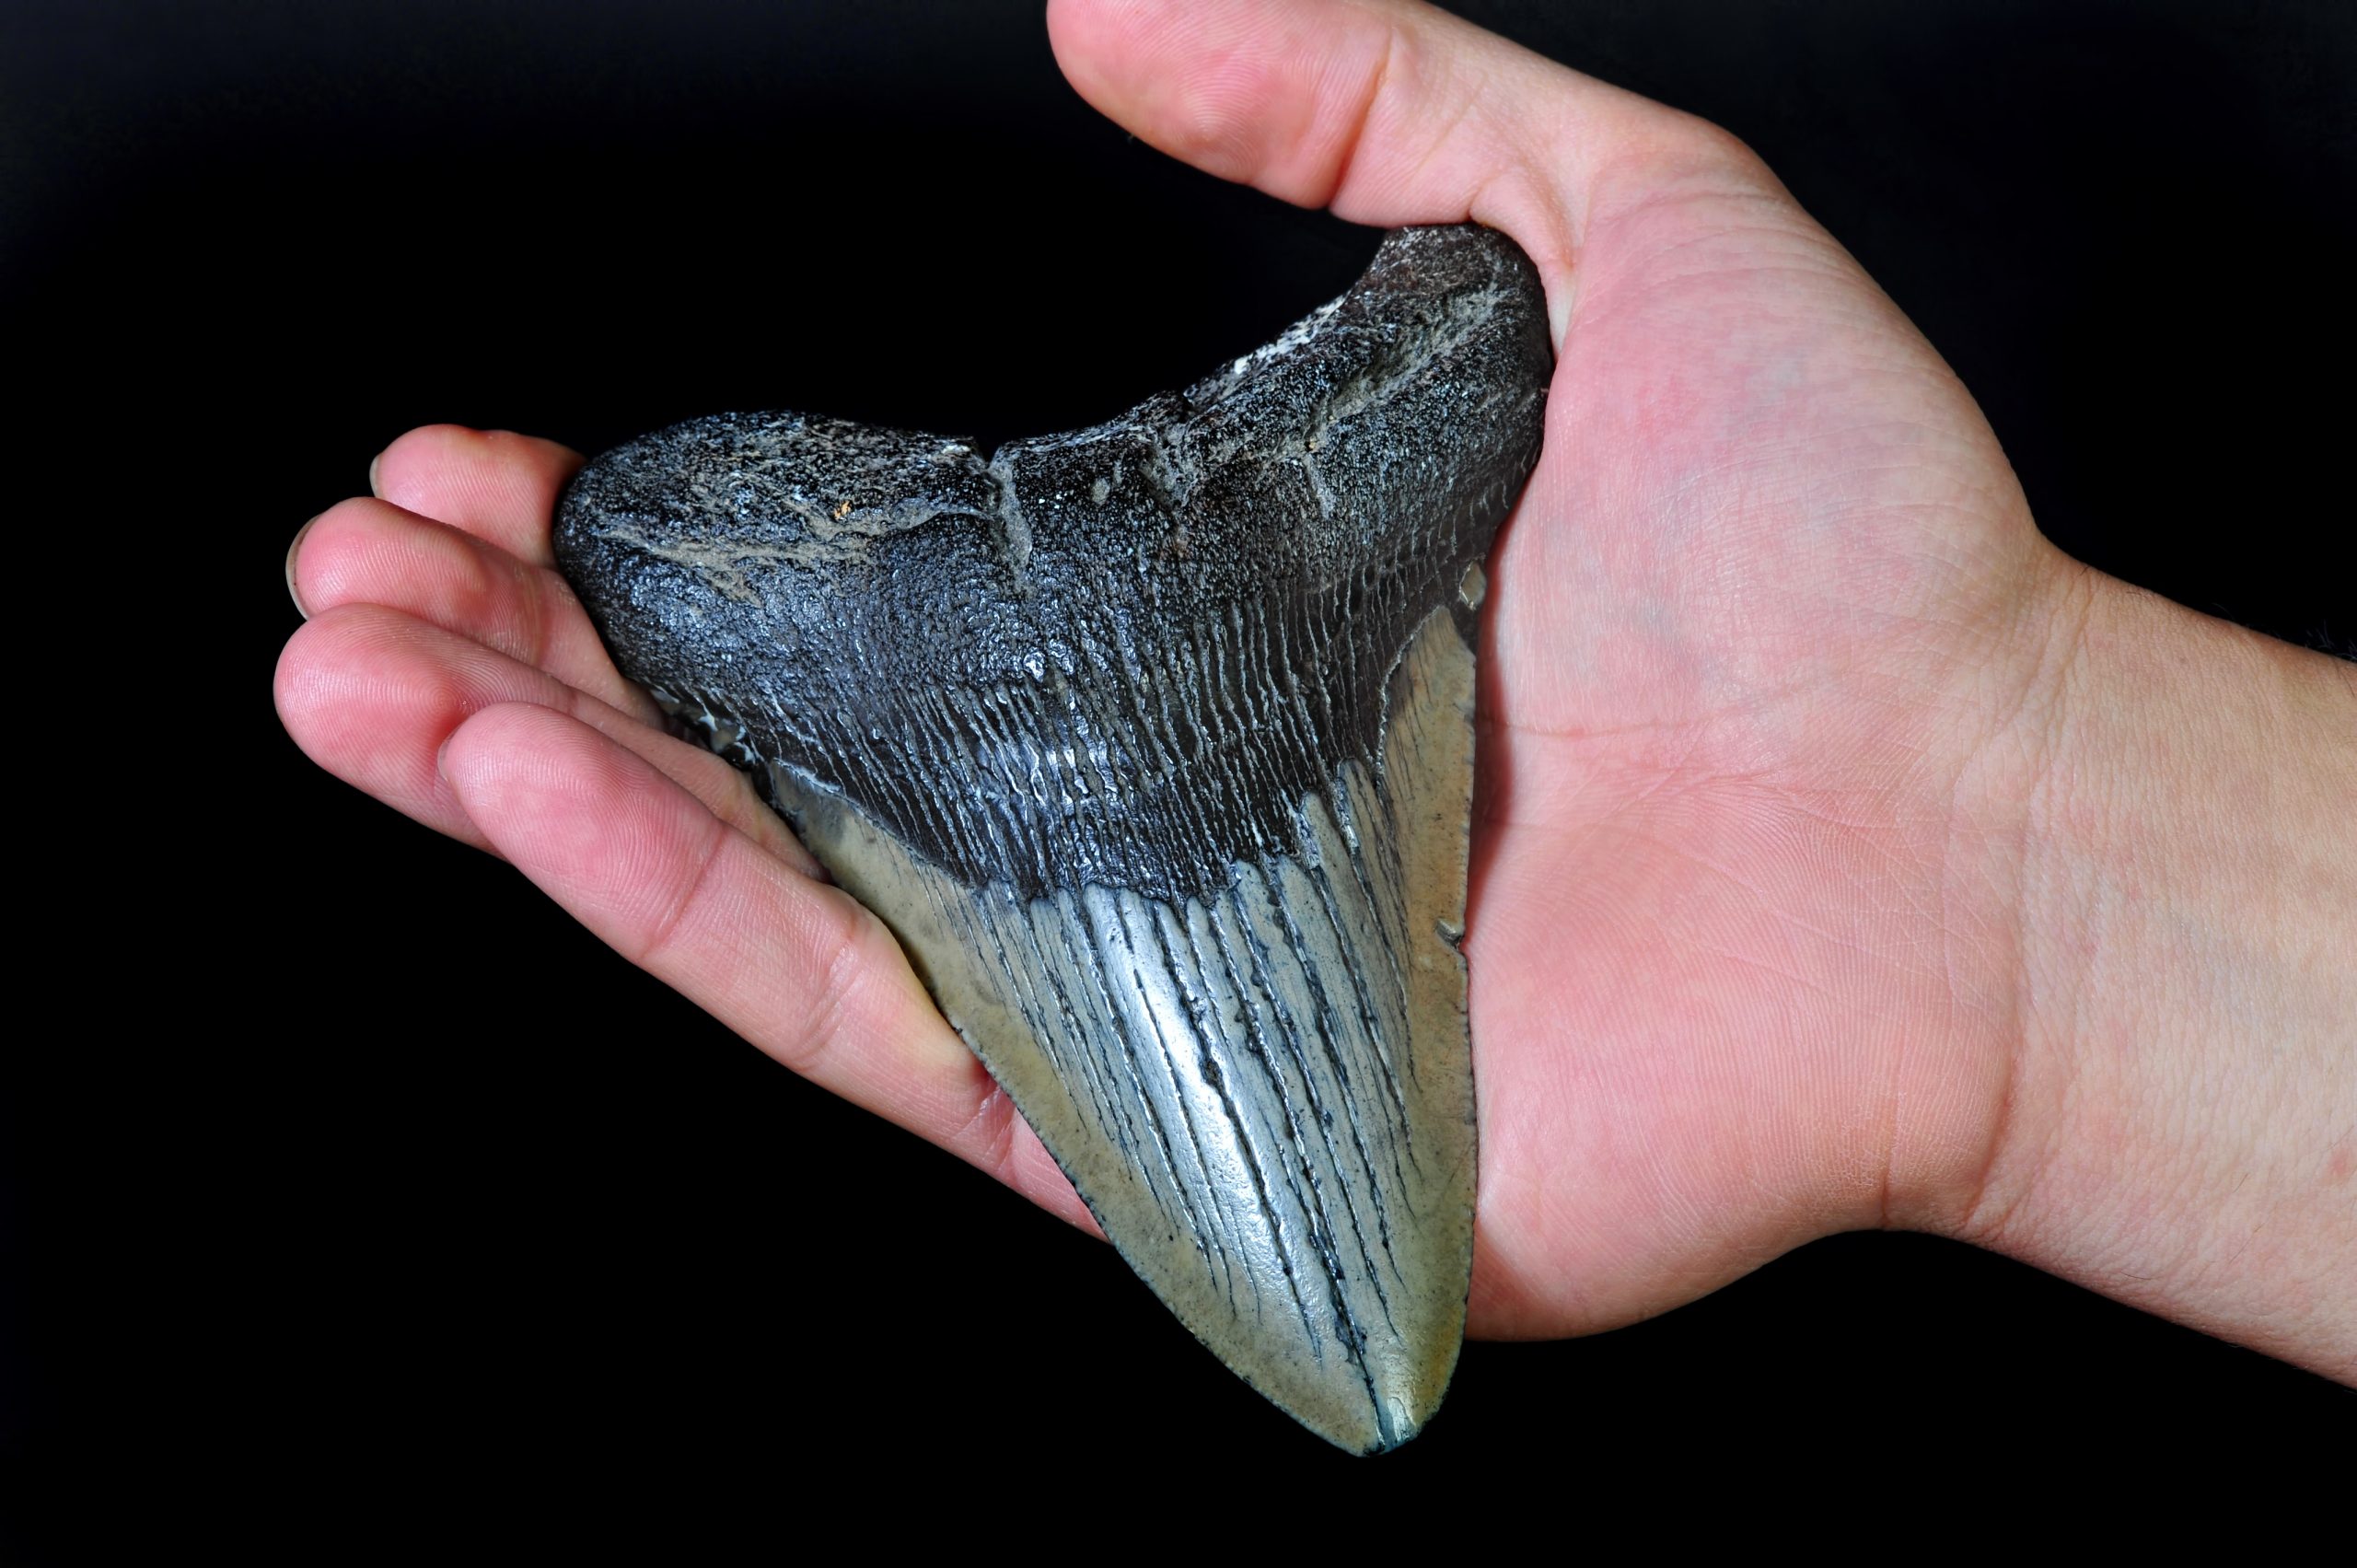 where can i hunt for megalodon teeth in south carolina